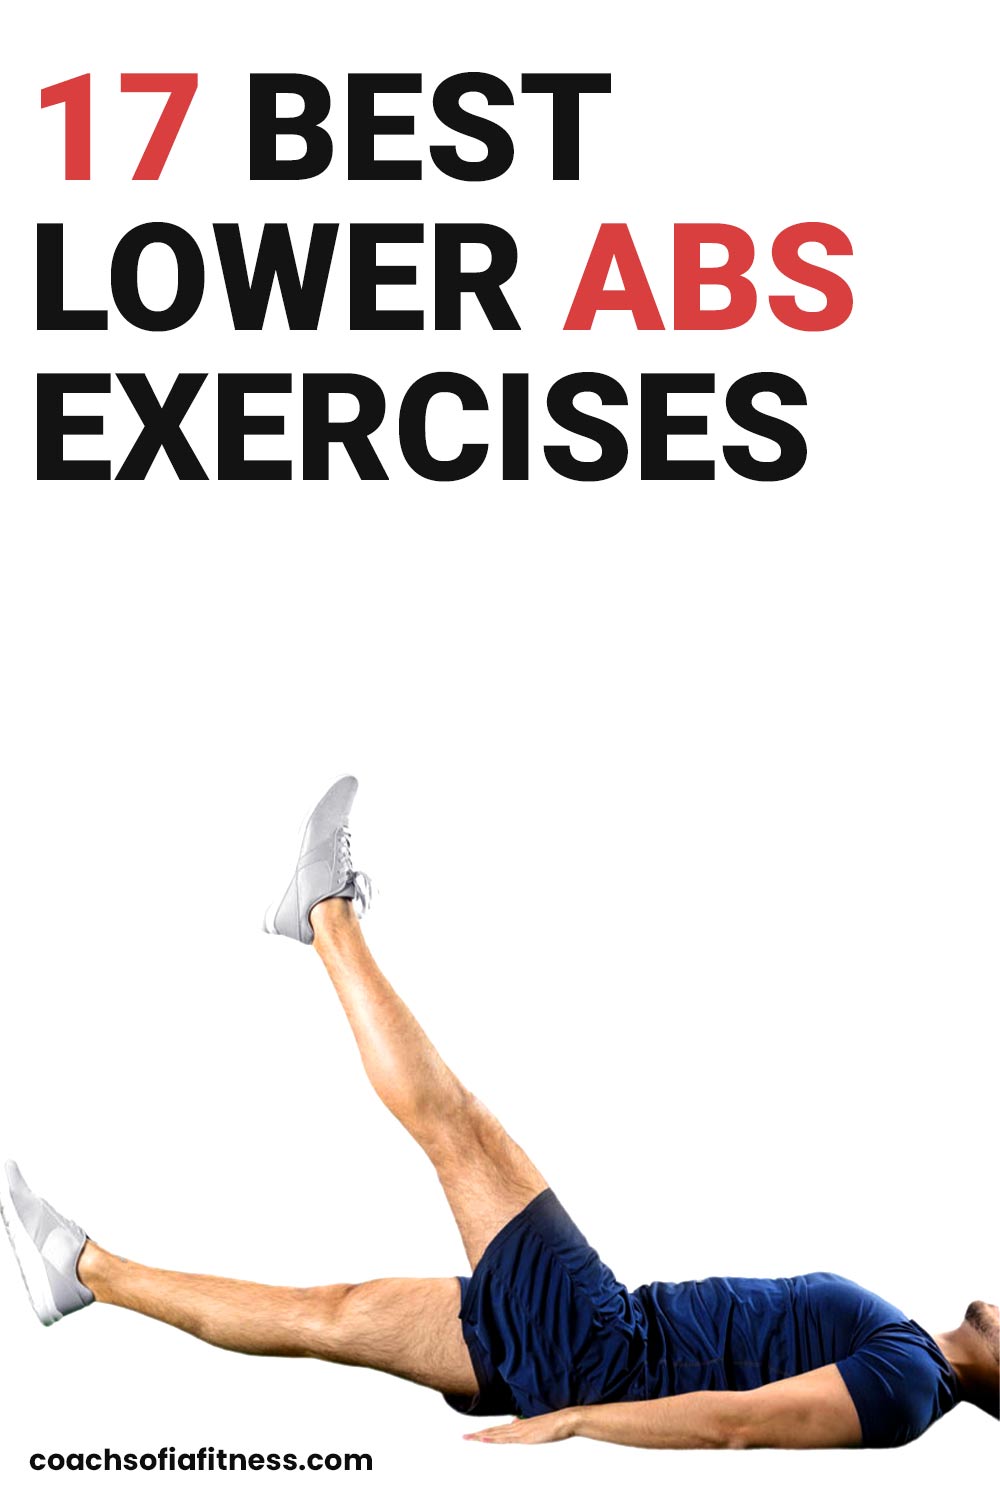 Killer at home AB exercise for women! NO EQUIPMENT. Add this to your workout  to shred your …